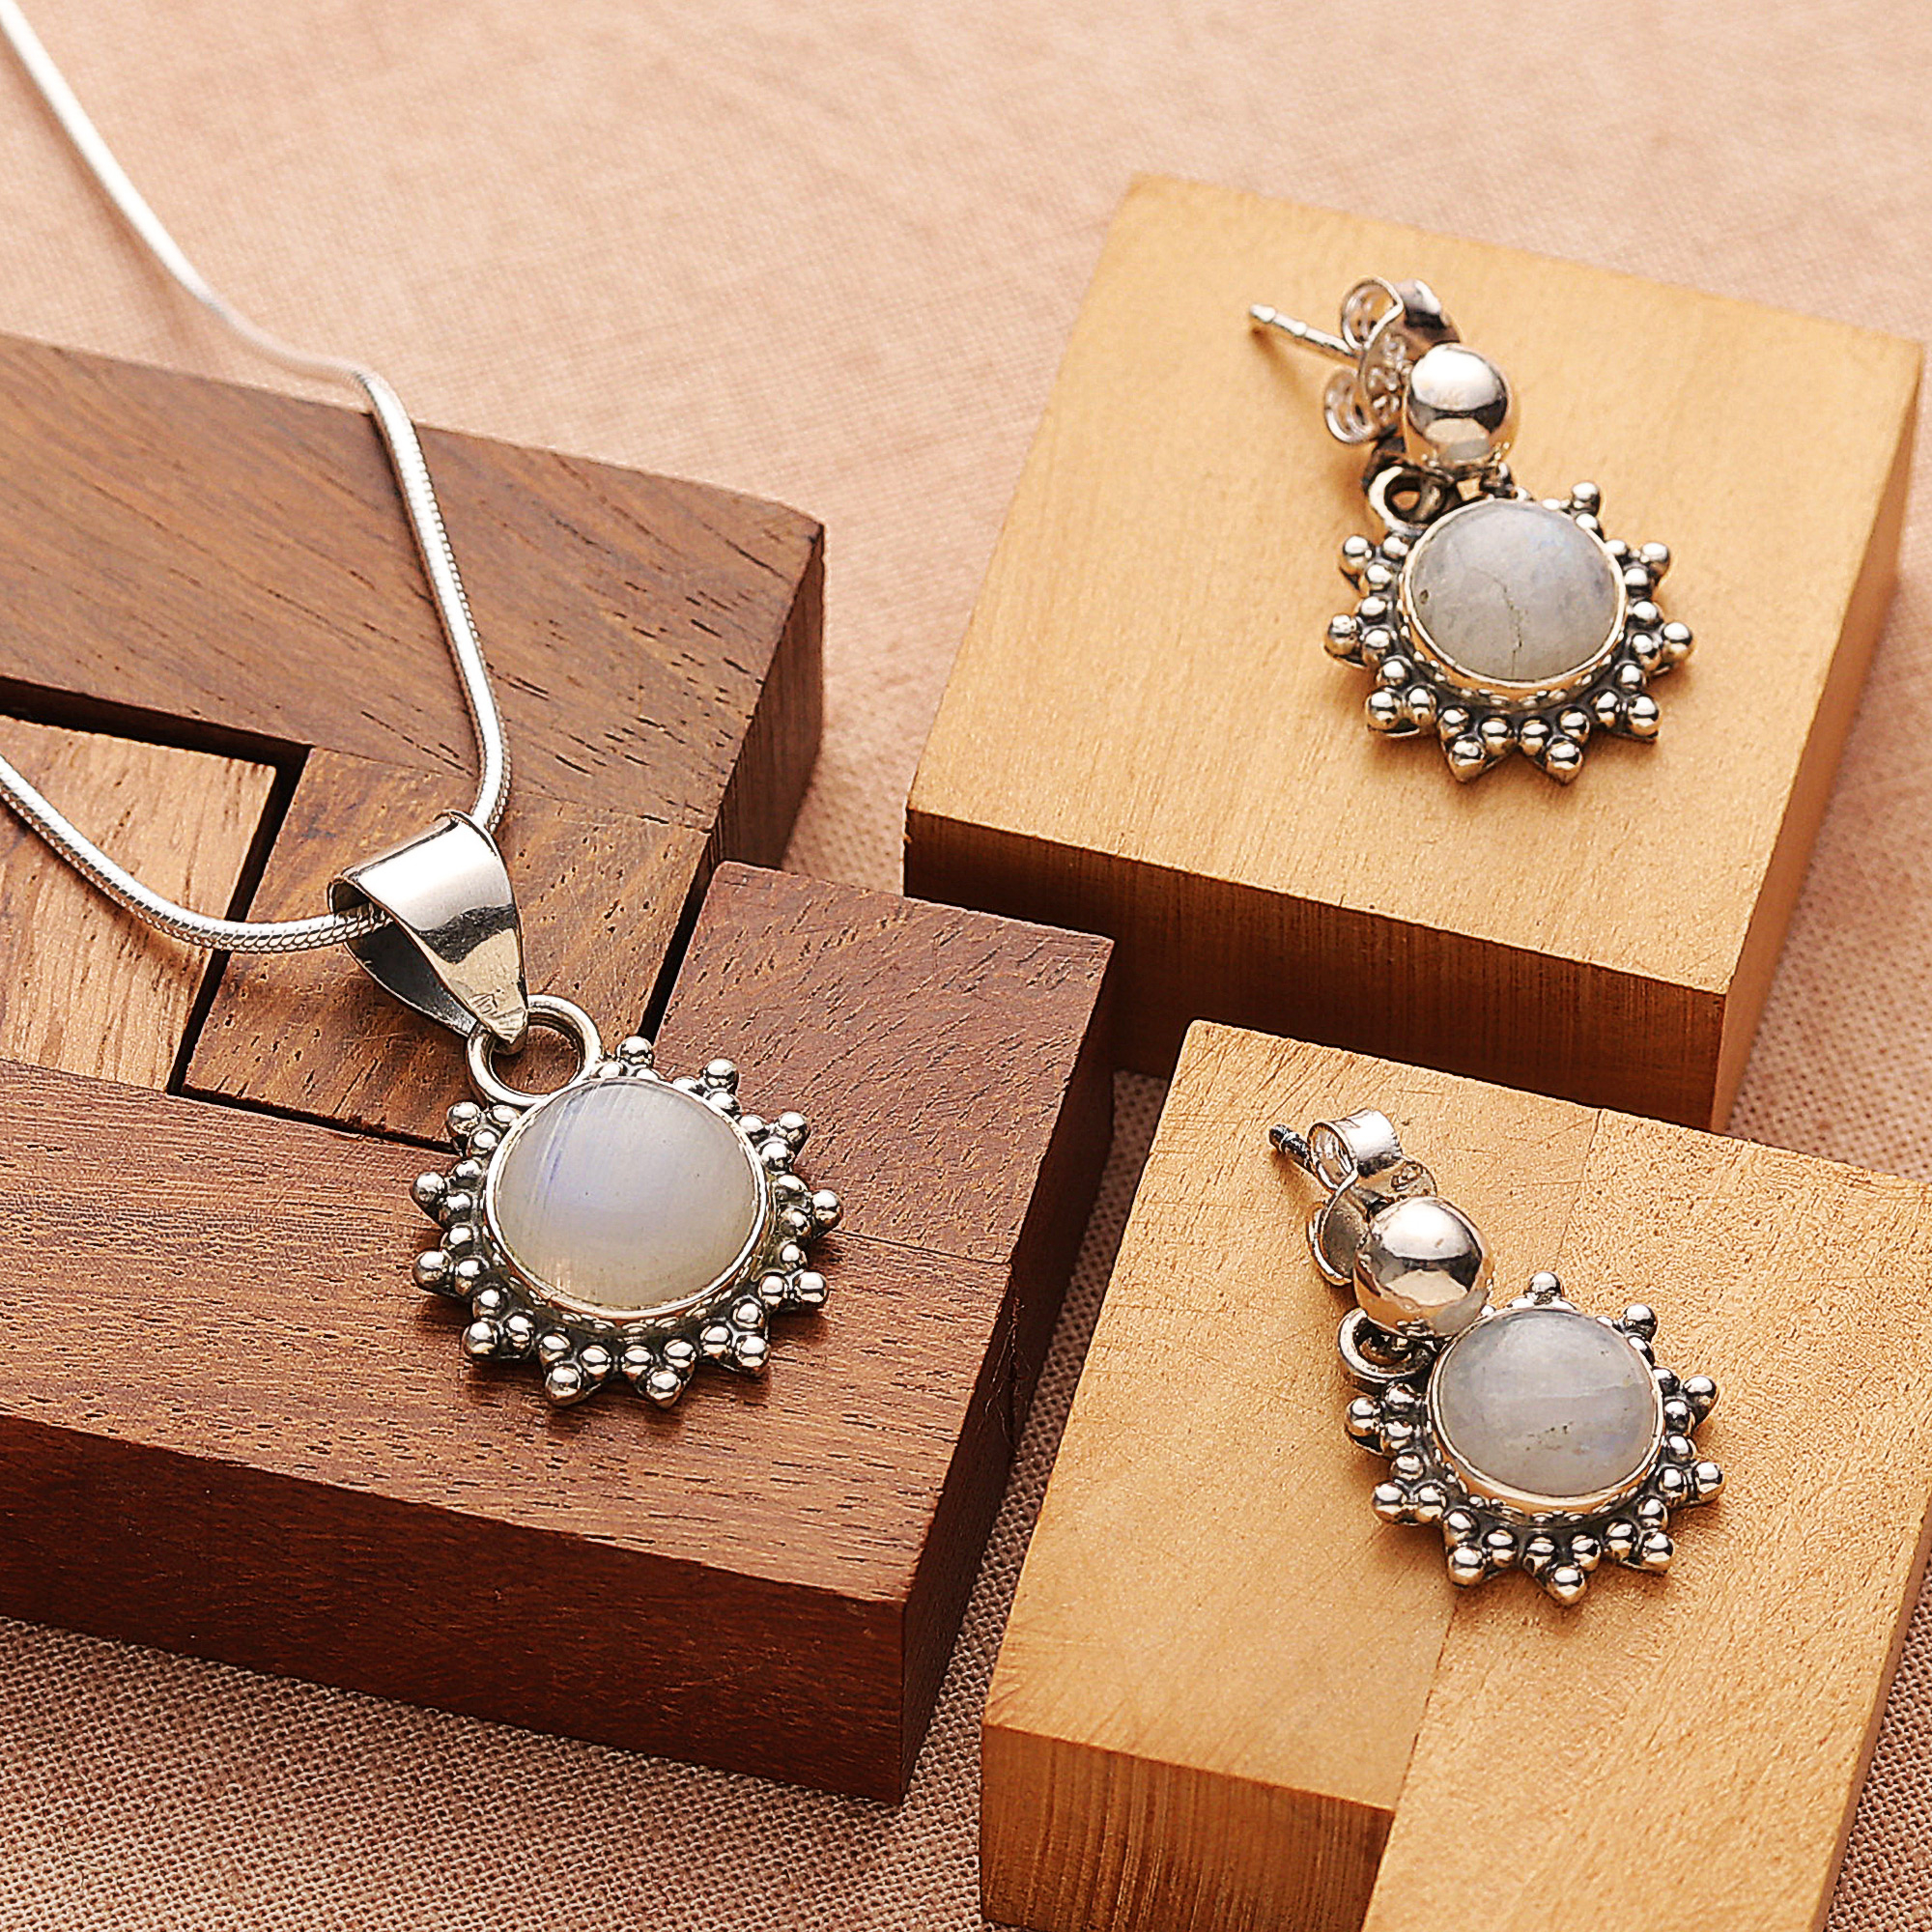 Good Fortune Sterling Silver Pendant Moonstone Jewelry Set, 'Goddess' Handcrafted Jewelry